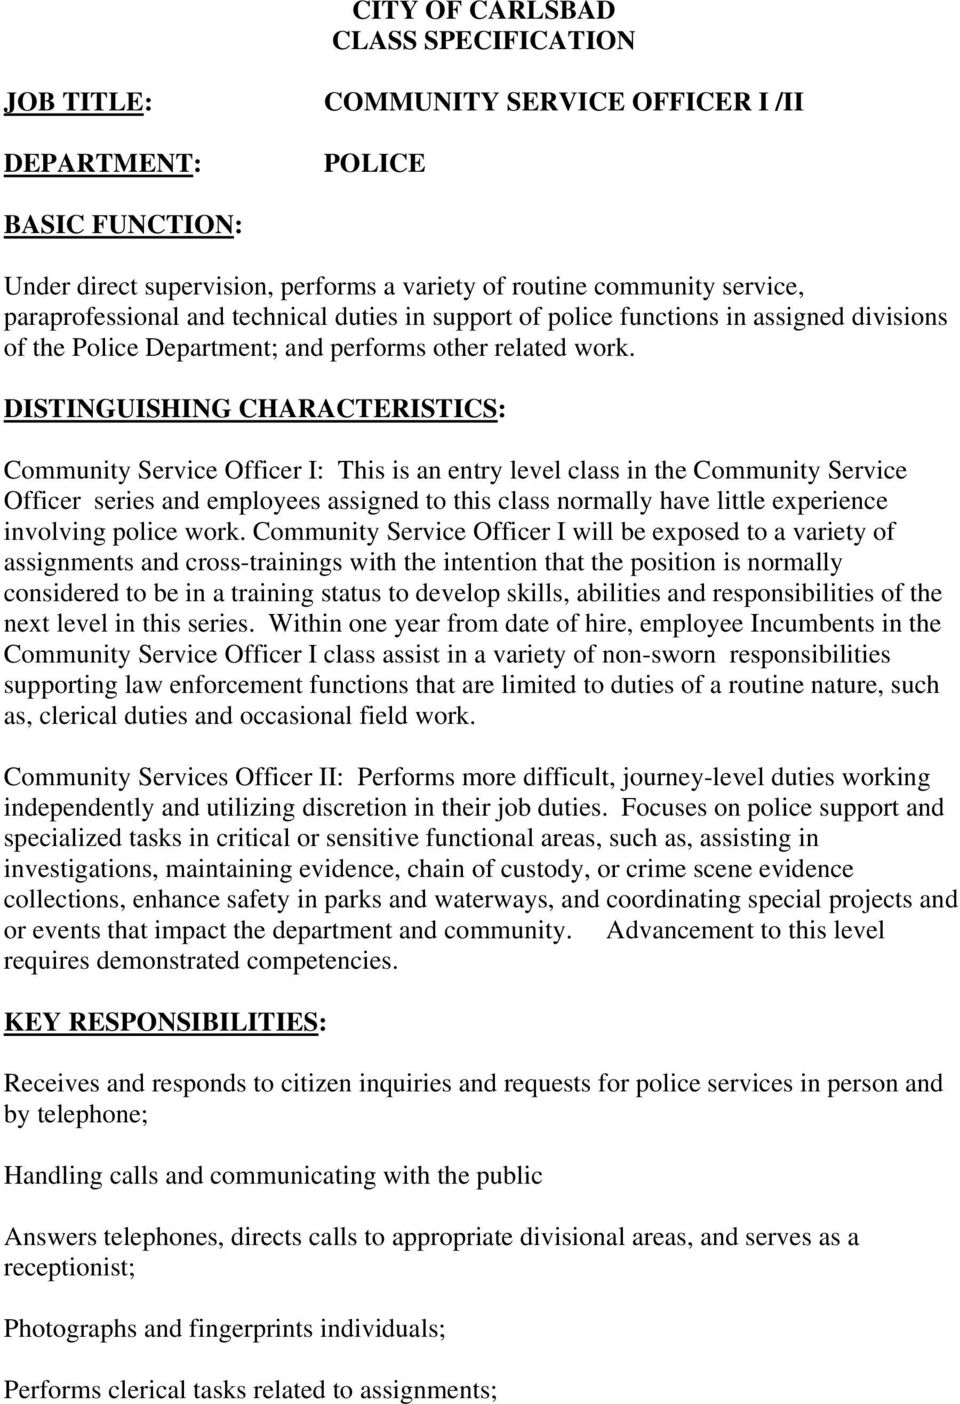 DISTINGUISHING CHARACTERISTICS: Community Service Officer I: This is an entry level class in the Community Service Officer series and employees assigned to this class normally have little experience